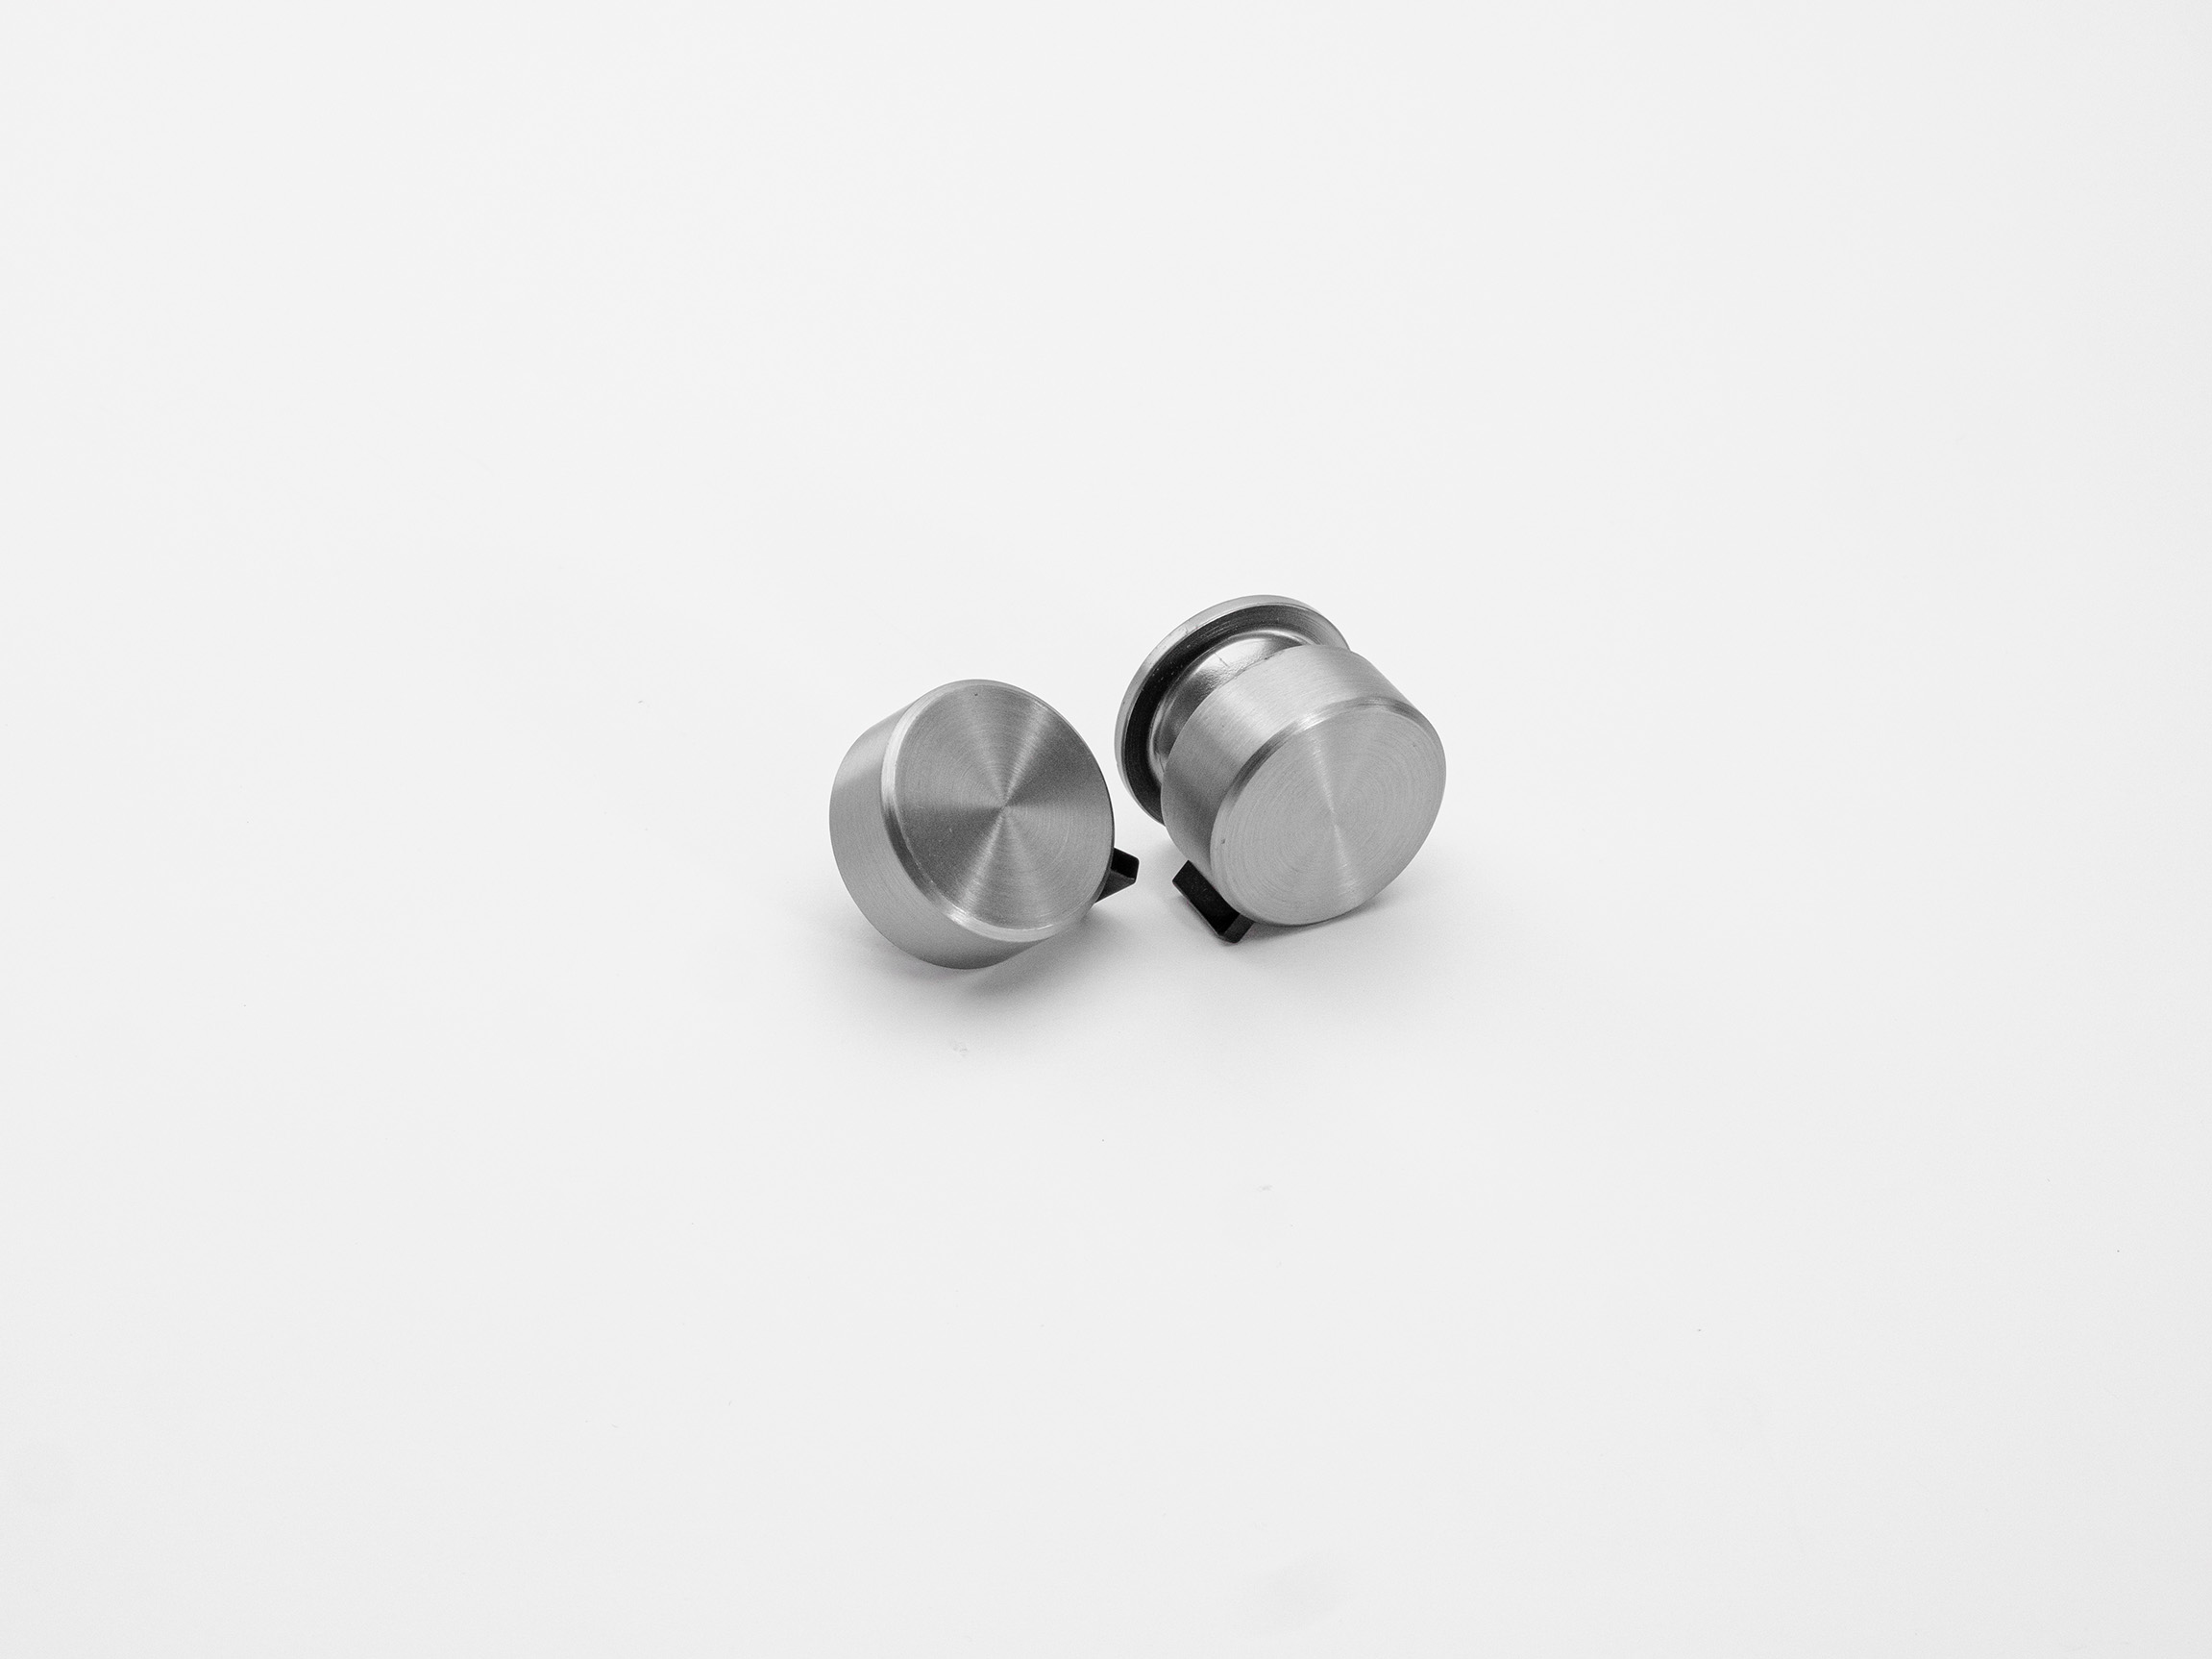 Oven and hob knobs - with brushed finish in stainless steel-like aluminium